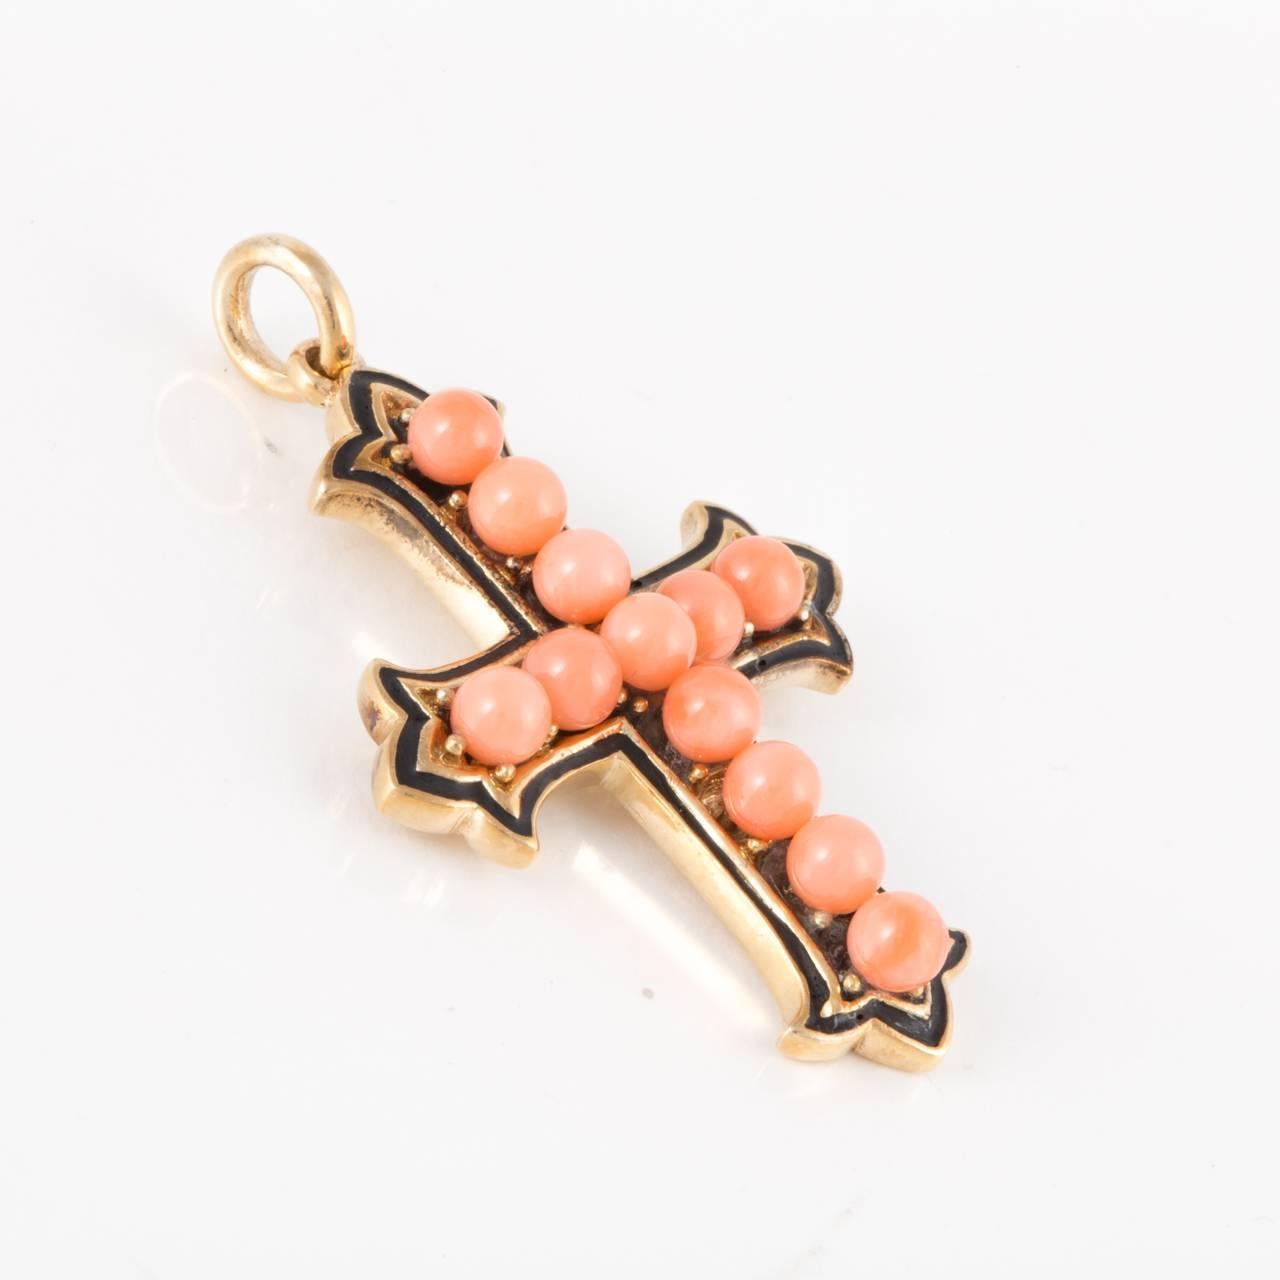 Victorian cross pendant composed of 9K yellow gold, featuring twelve coral beads down the center which are highlighted by blue enamel.  Measures 1 1/2 inches long and 1 1/8 inches wide. Circa 1870.